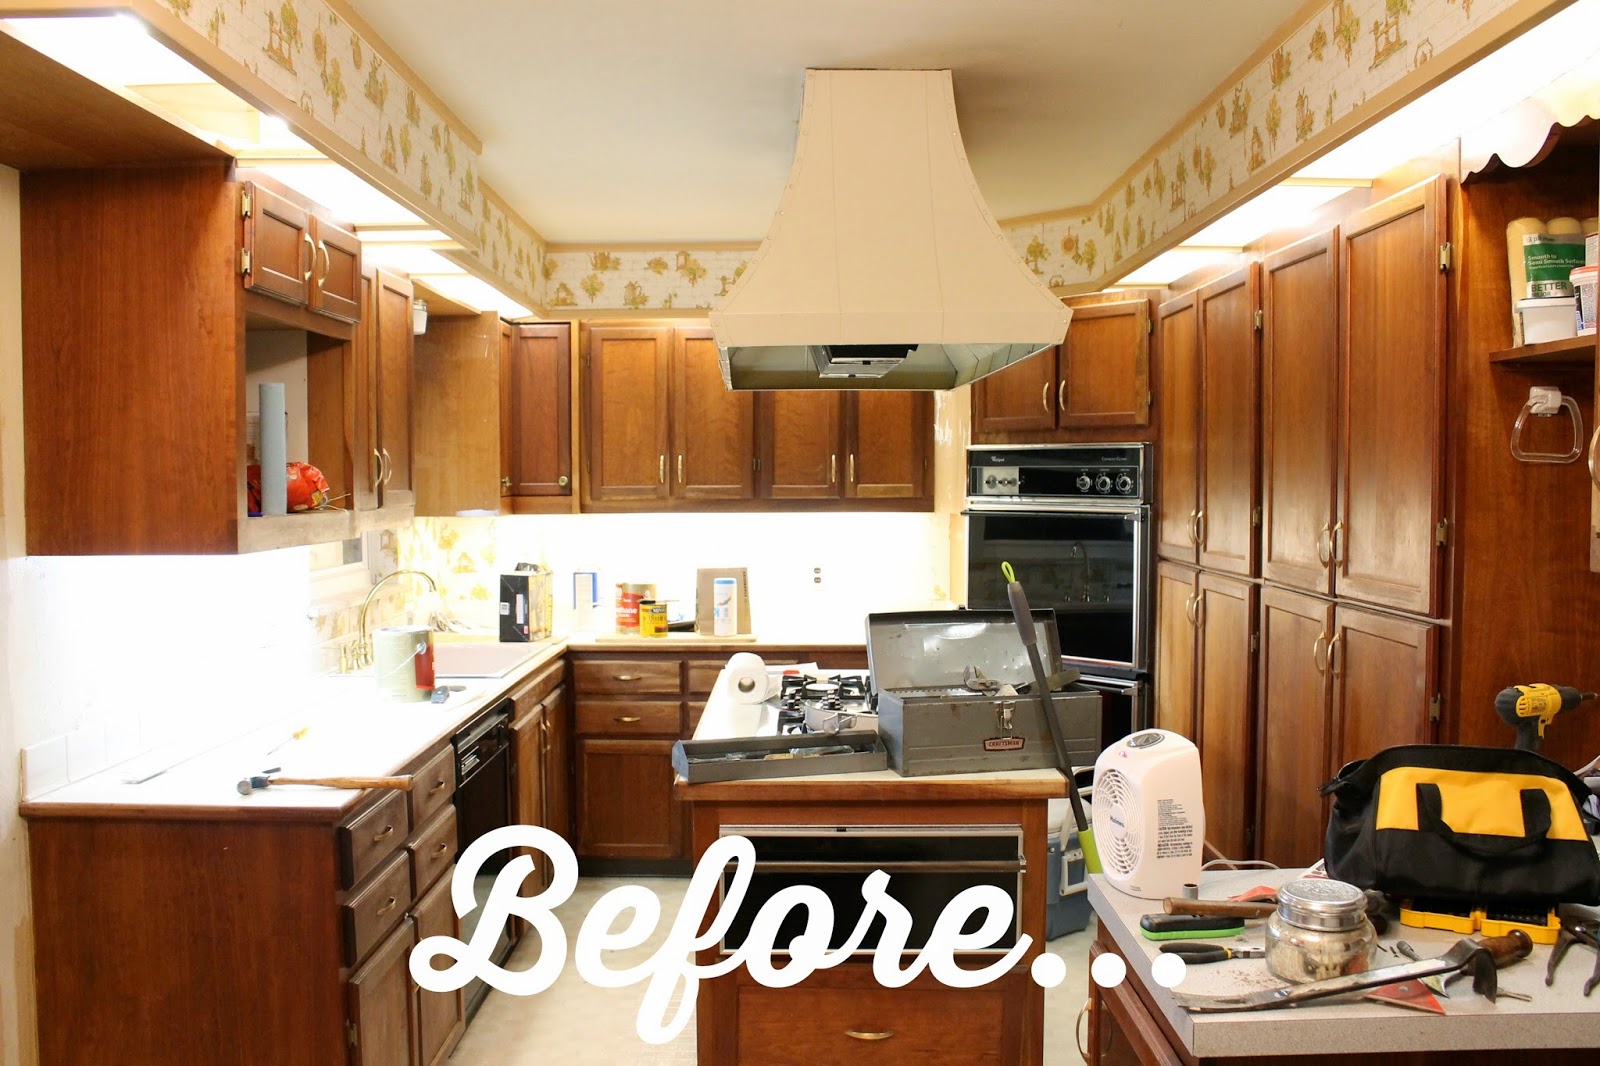 Wonderfully Made Extending Kitchen Cabinets To The Ceiling